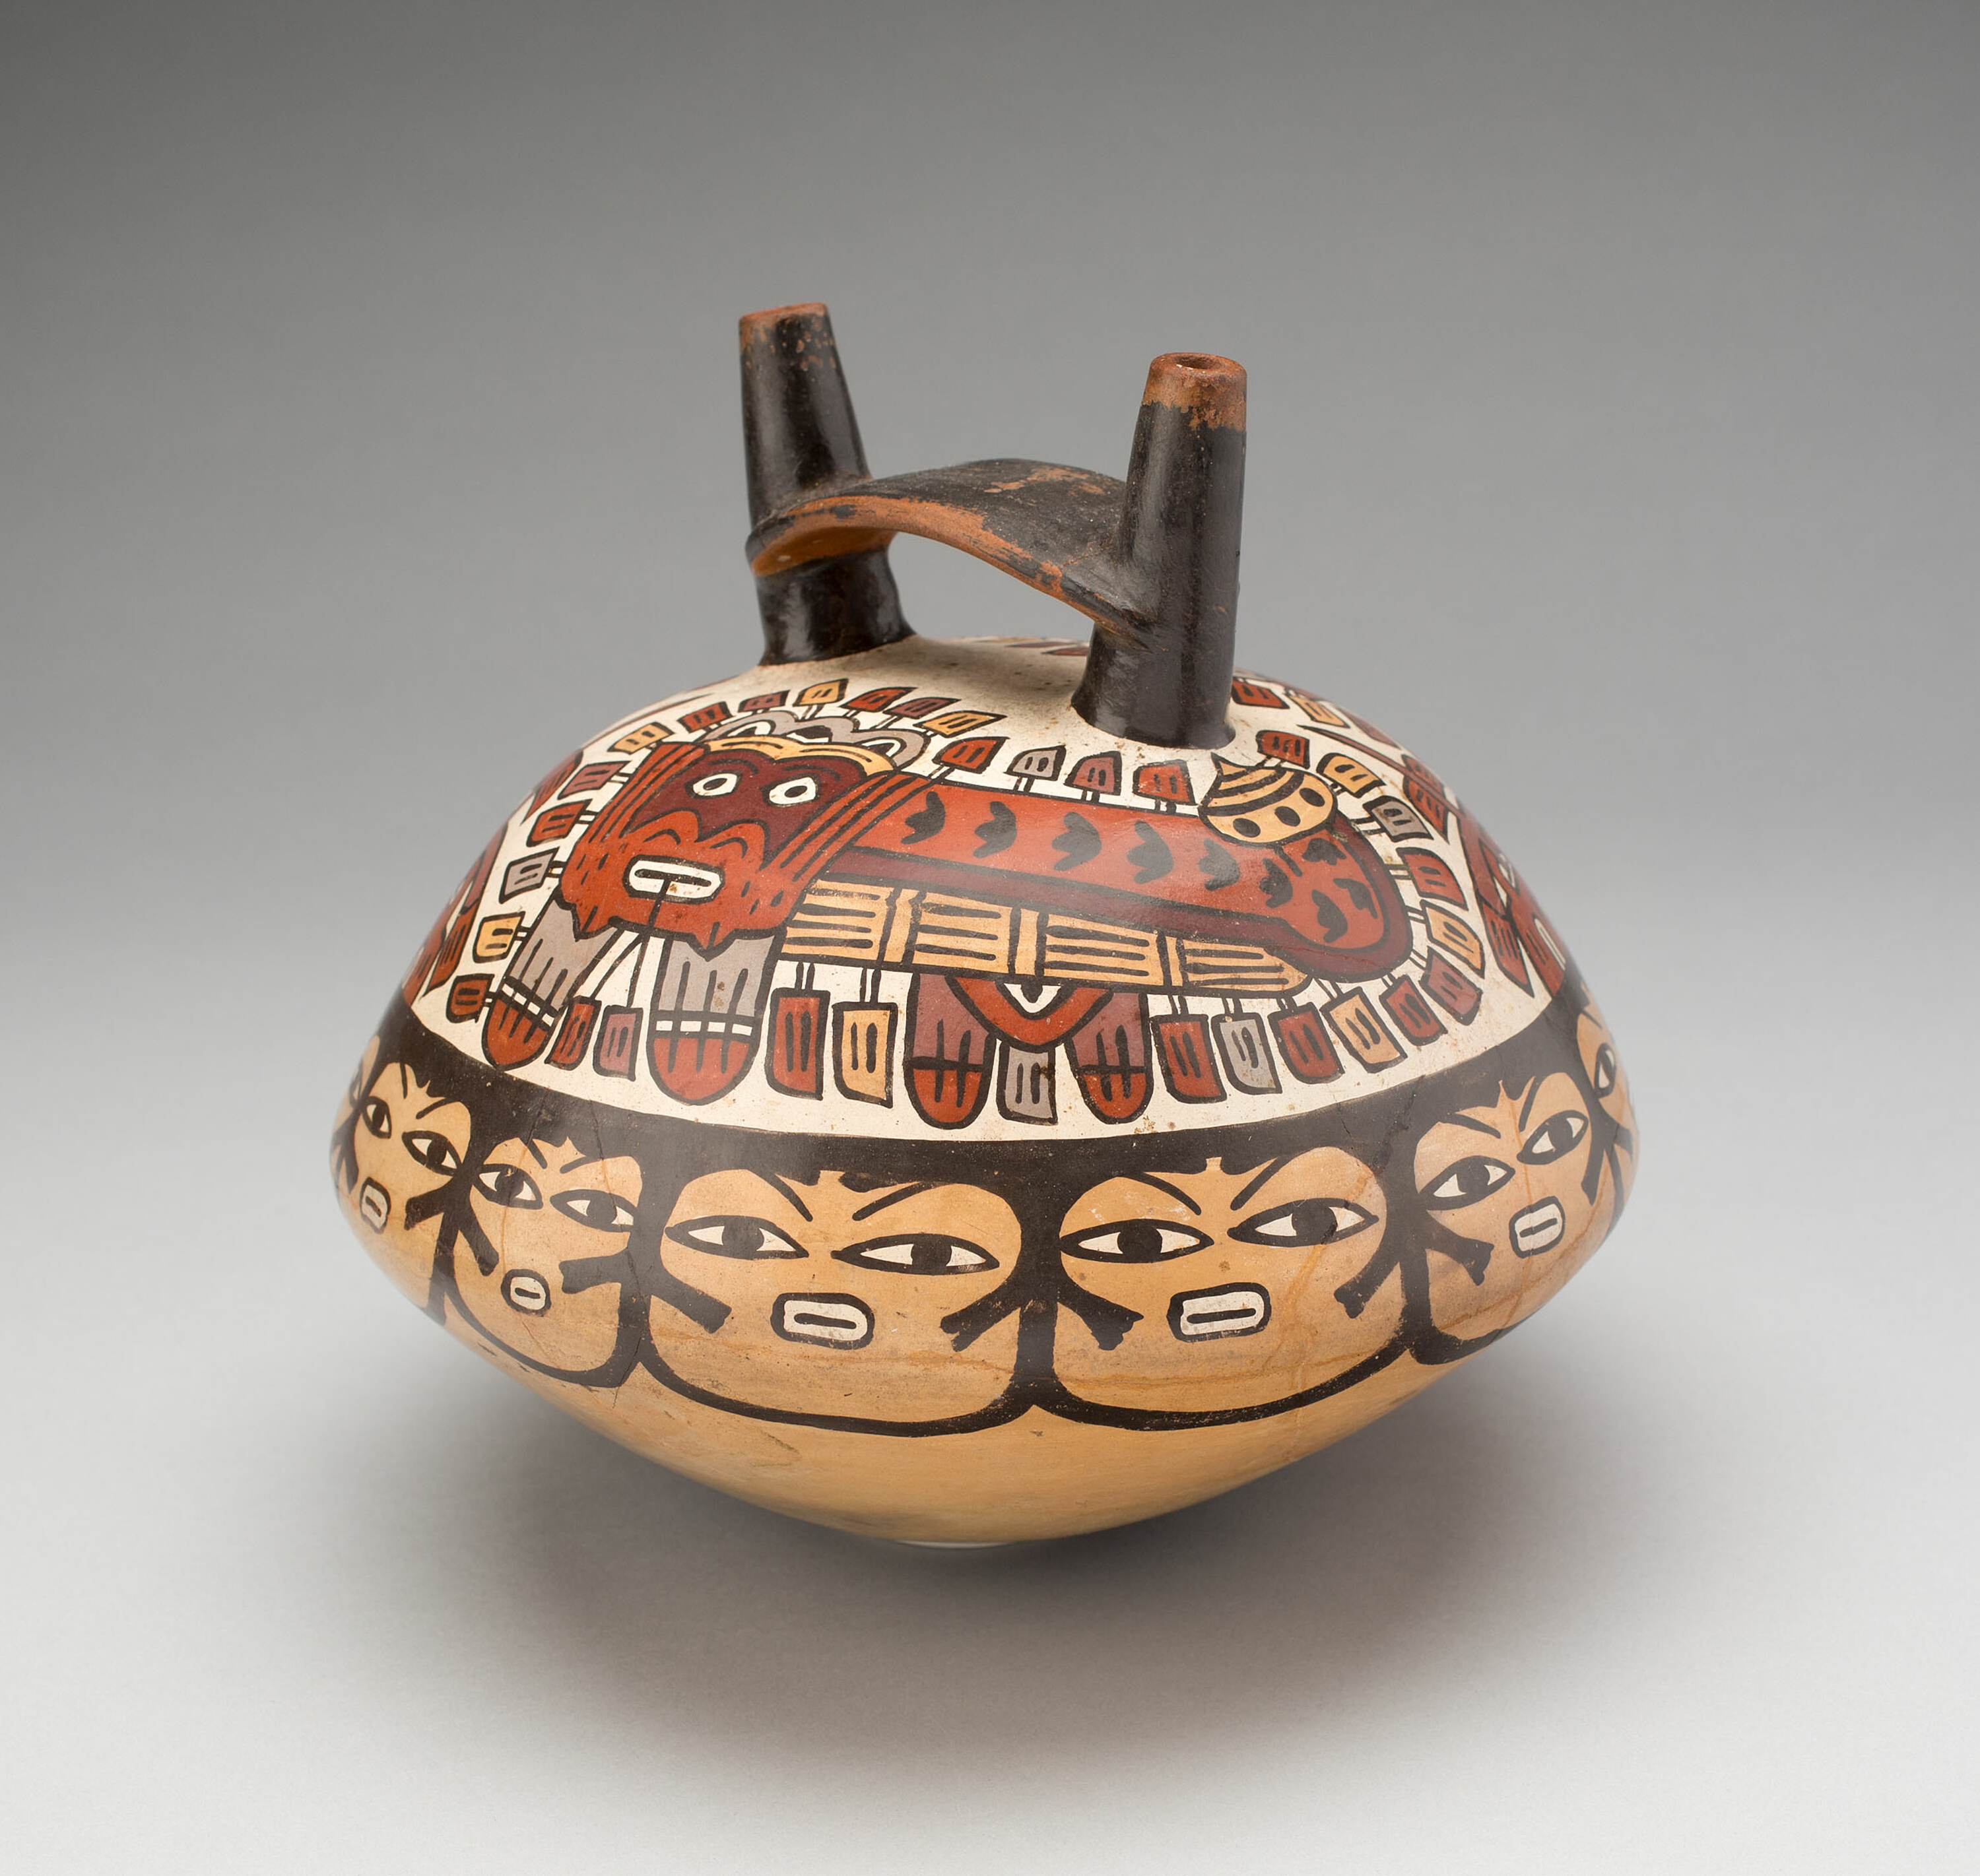 Vessel with Women’s Faces and Masked Beings (ca. 350-550 CE); Nazca Culture, South coast Peru.jpg